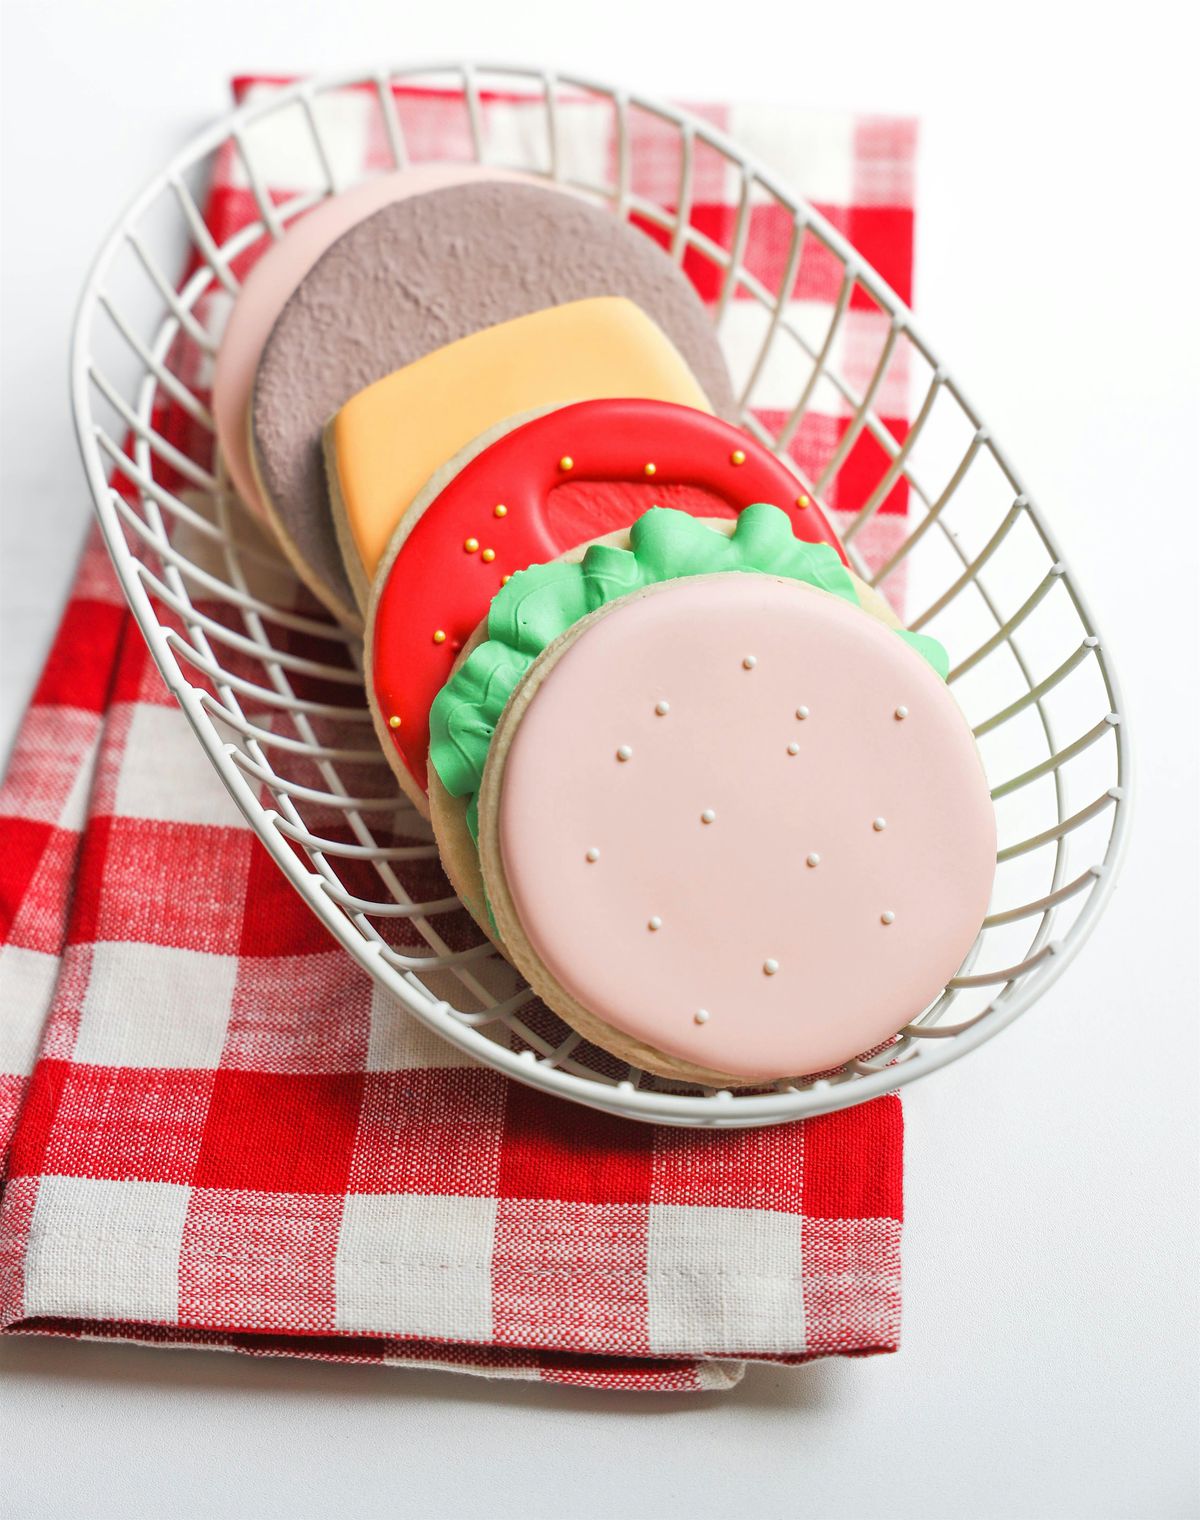 Build a Burger Sugar Cookie Decorating Class - All Ages